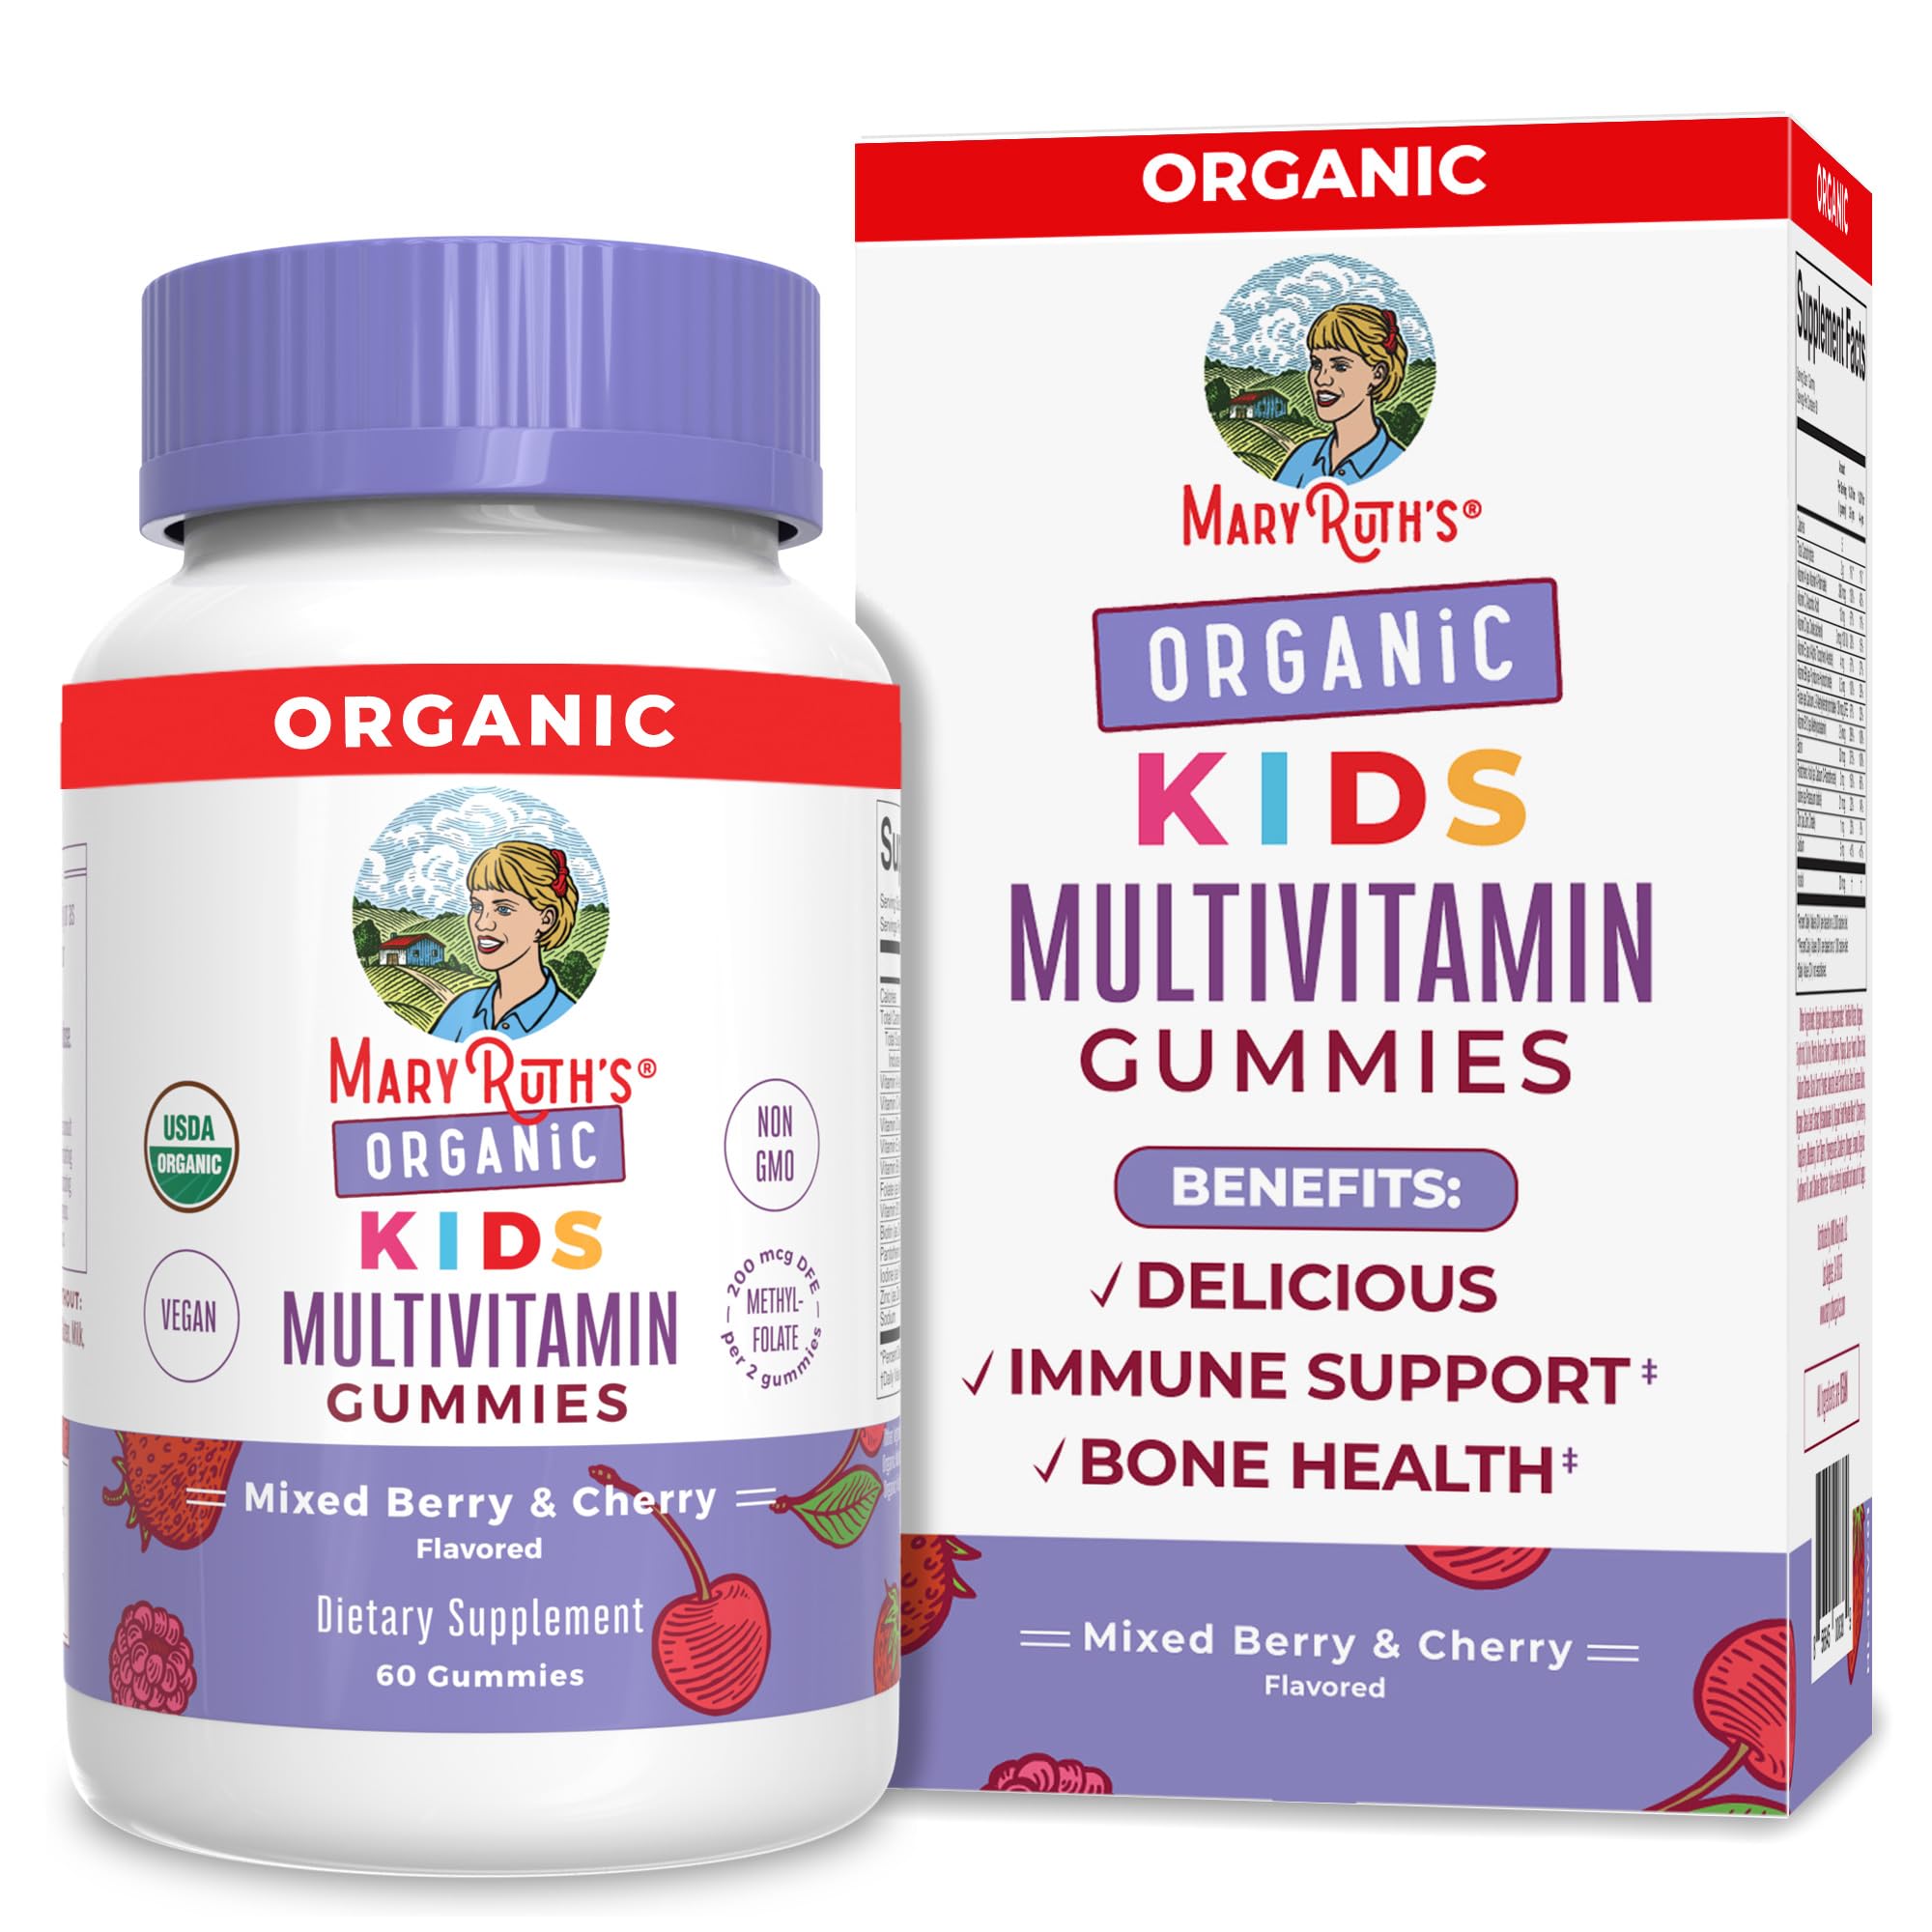 MaryRuth's Kids Multivitamin Gummies, Multivitamin Jelly Beans, and Vitamin C Gummies, 3-Pack Bundle for Immune Support, Bone Health, and Overall Health, Vegan, Non-GMO